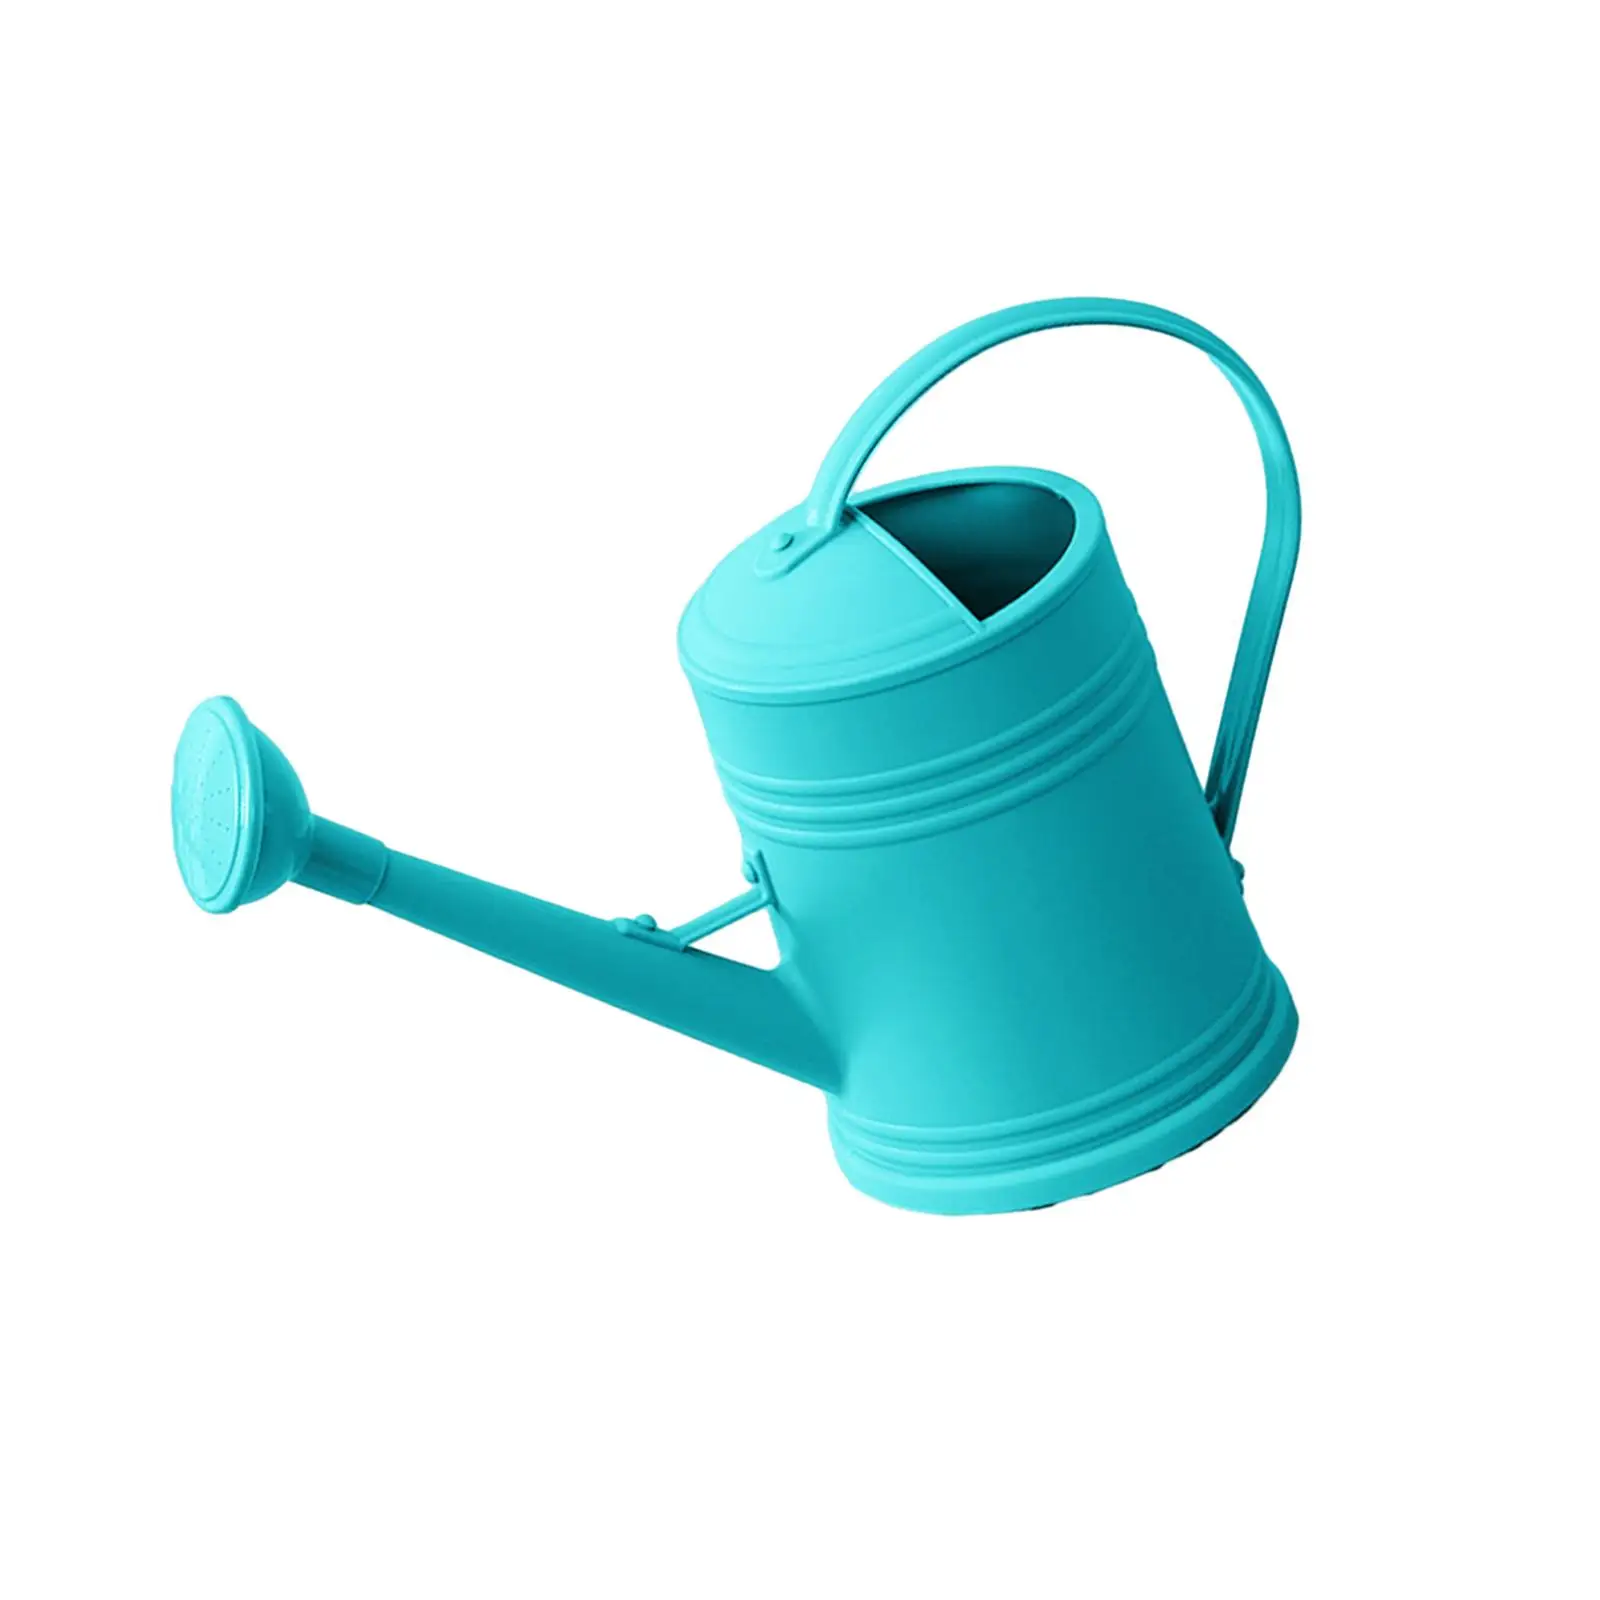 Long Spout Watering Can 0.5 Gallon Long Mouth Large Capacity Flower Watering Can for Indoor Outdoor Plants Planter Flower Kettle